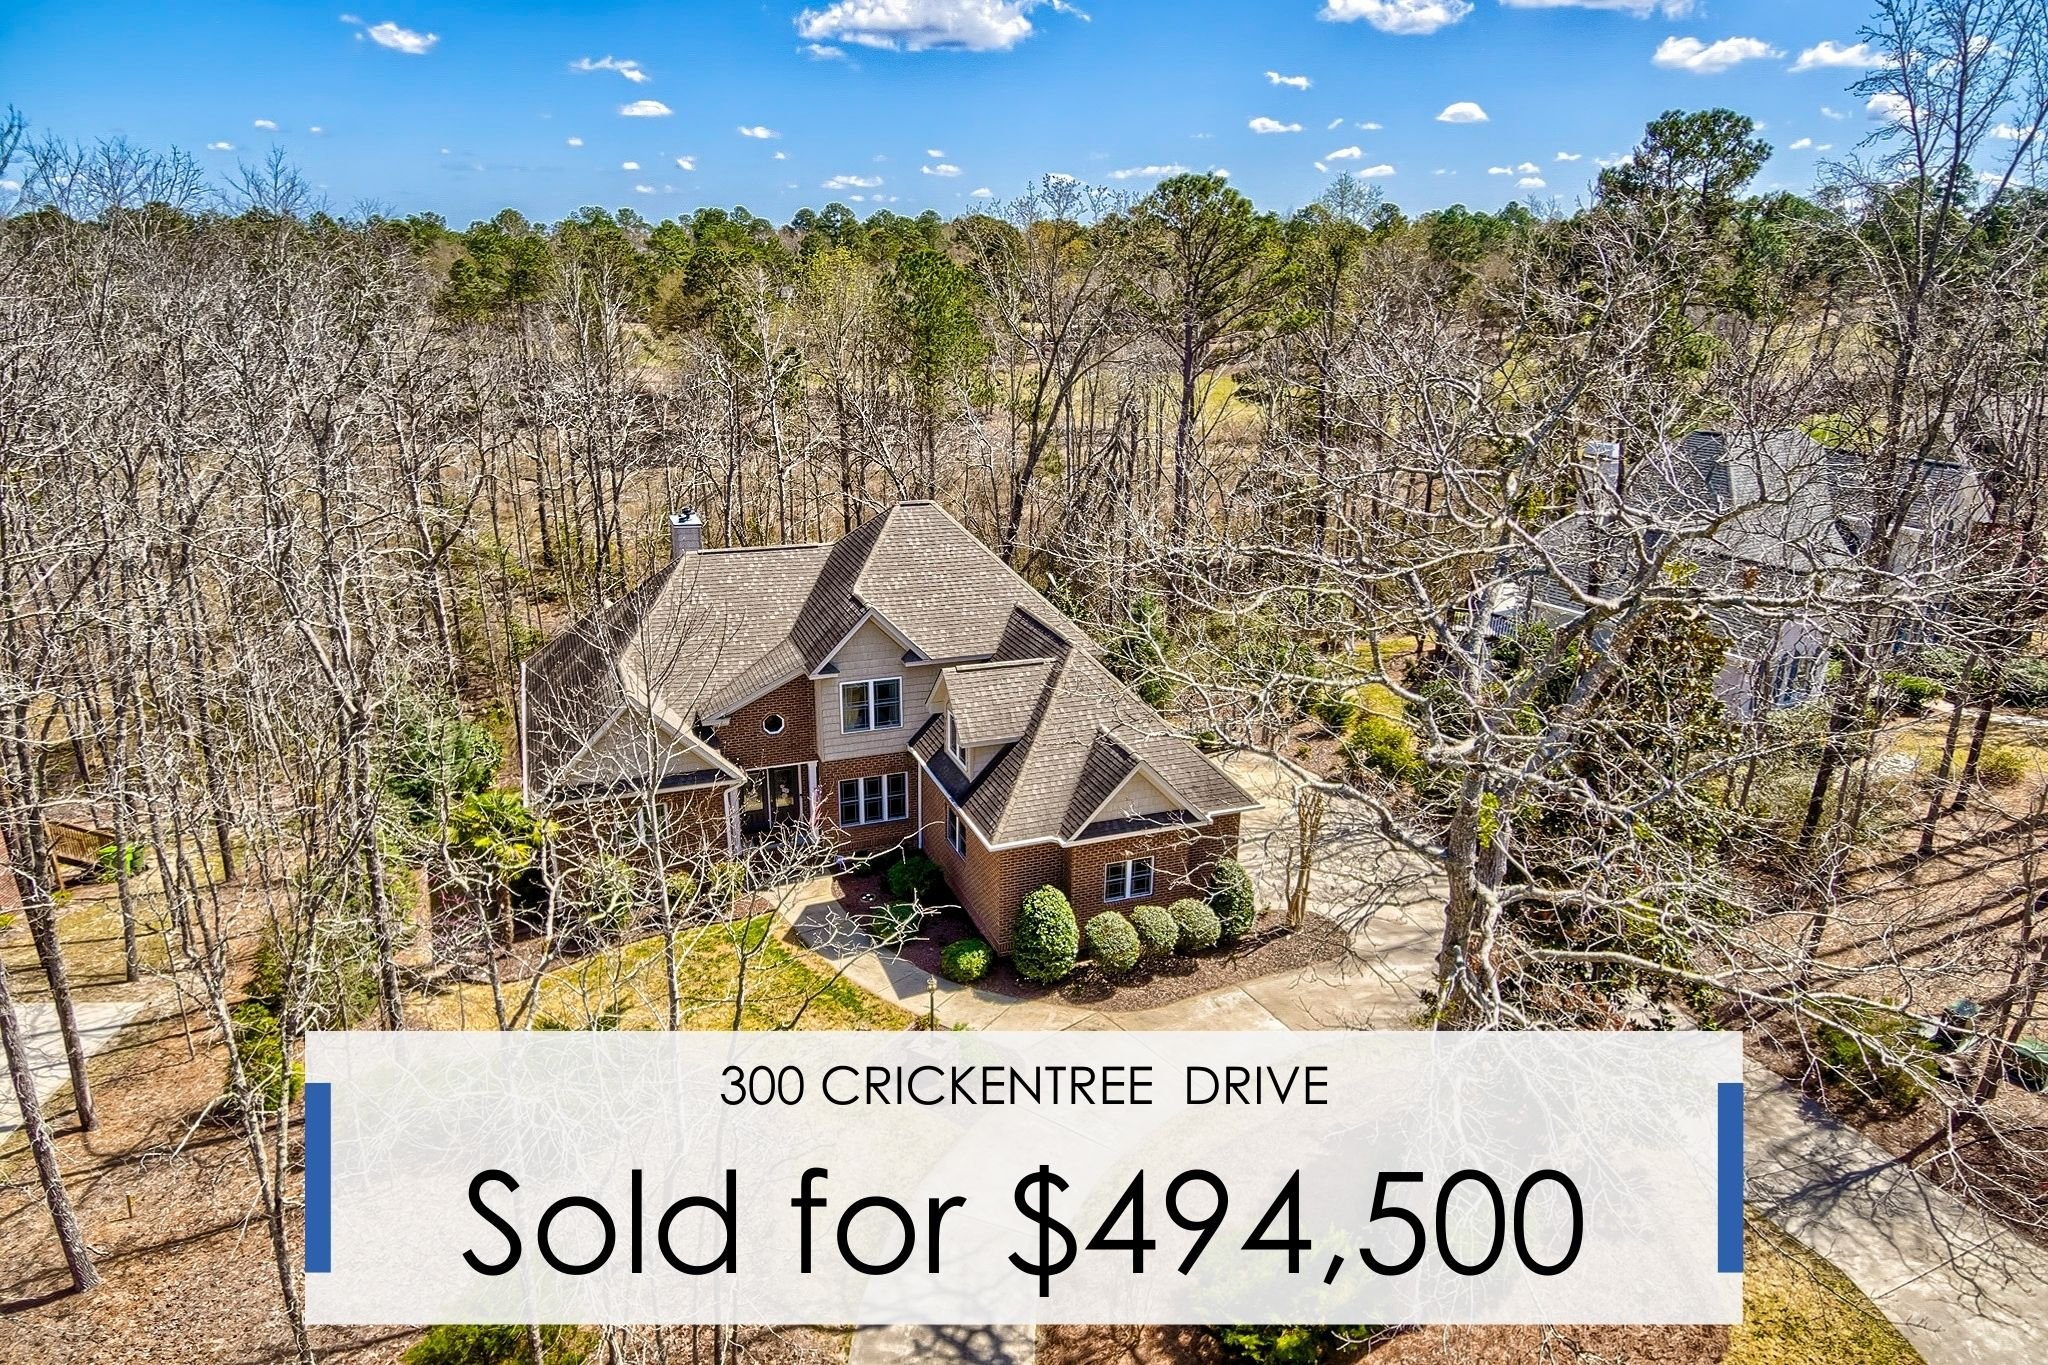 300 Crickentree Drive | Sold for $494,500